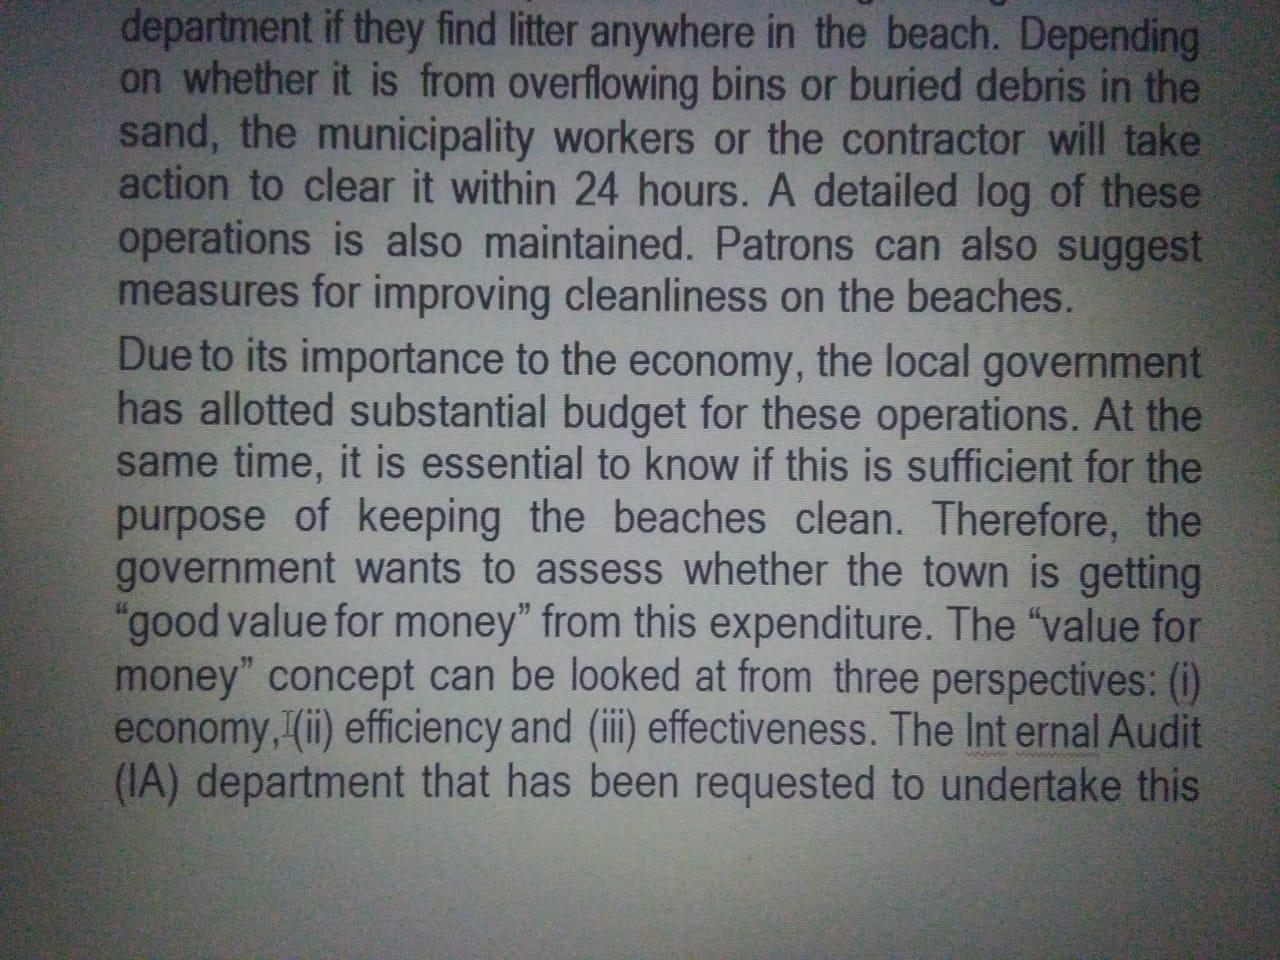 department if they find litter anywhere in the beach. Depending on whether it is from overflowing bins or buried debris in th